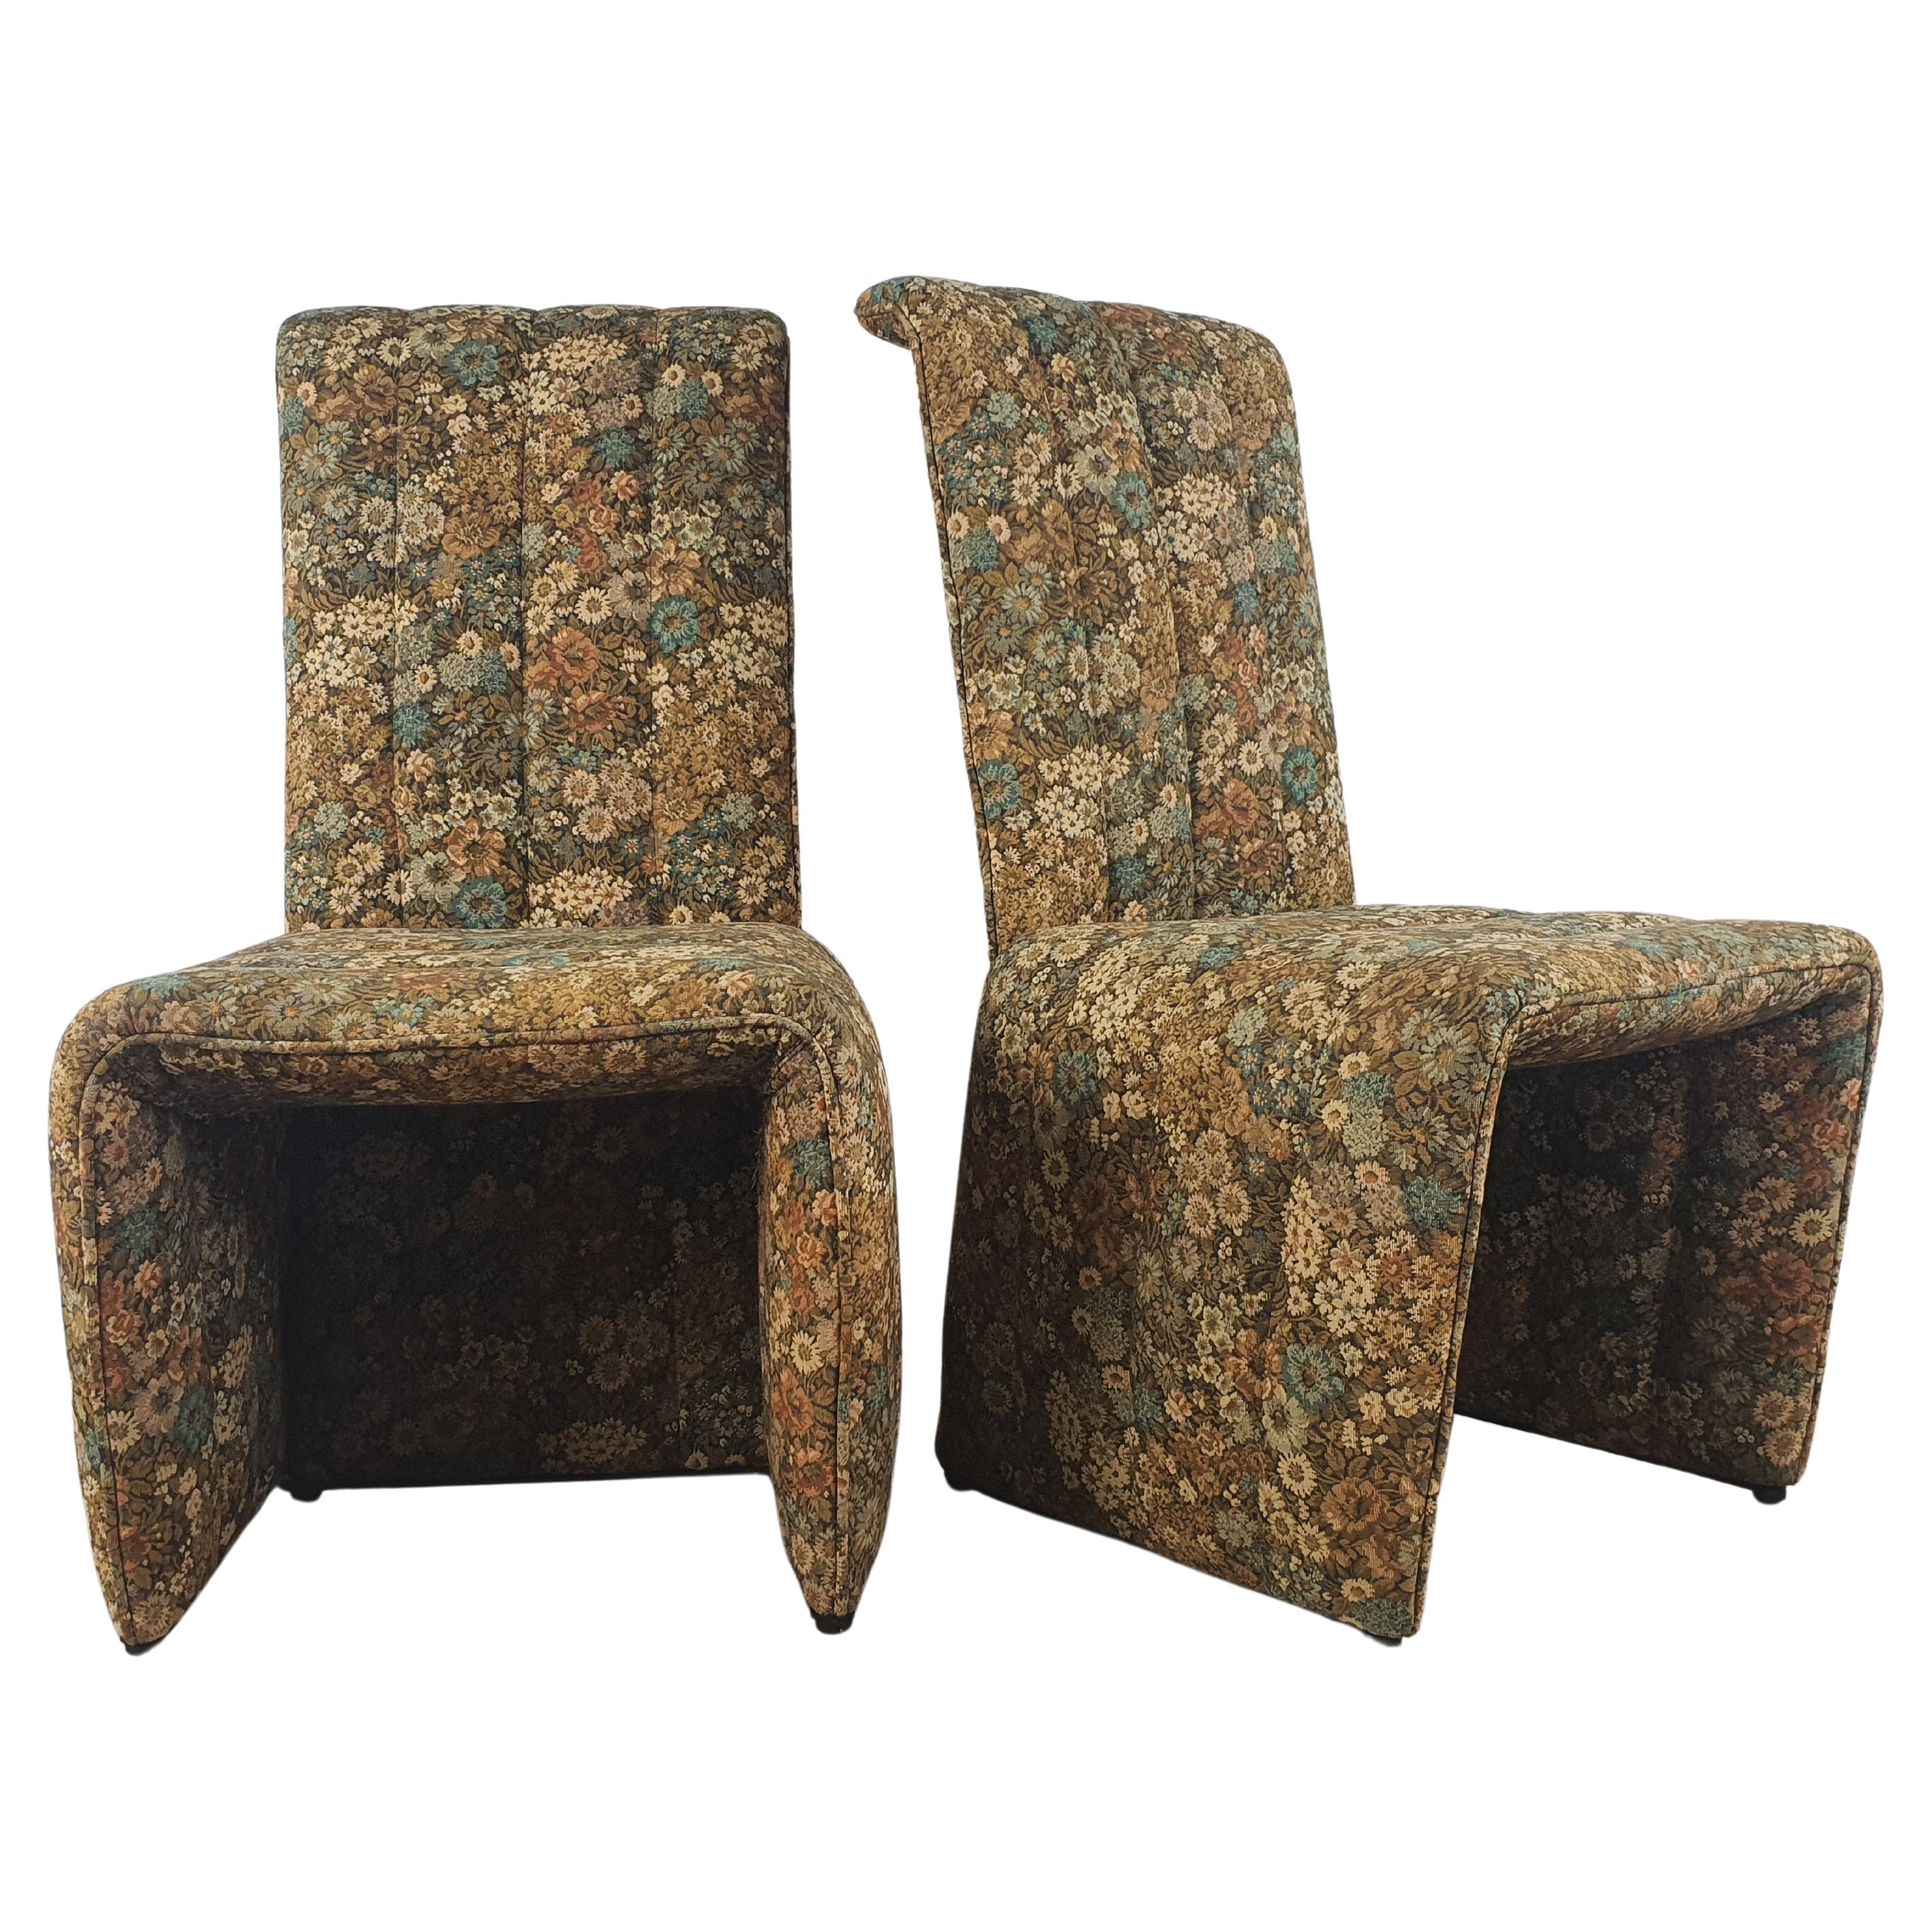 Pair of Chairs with 1970s Design Floral Fabric